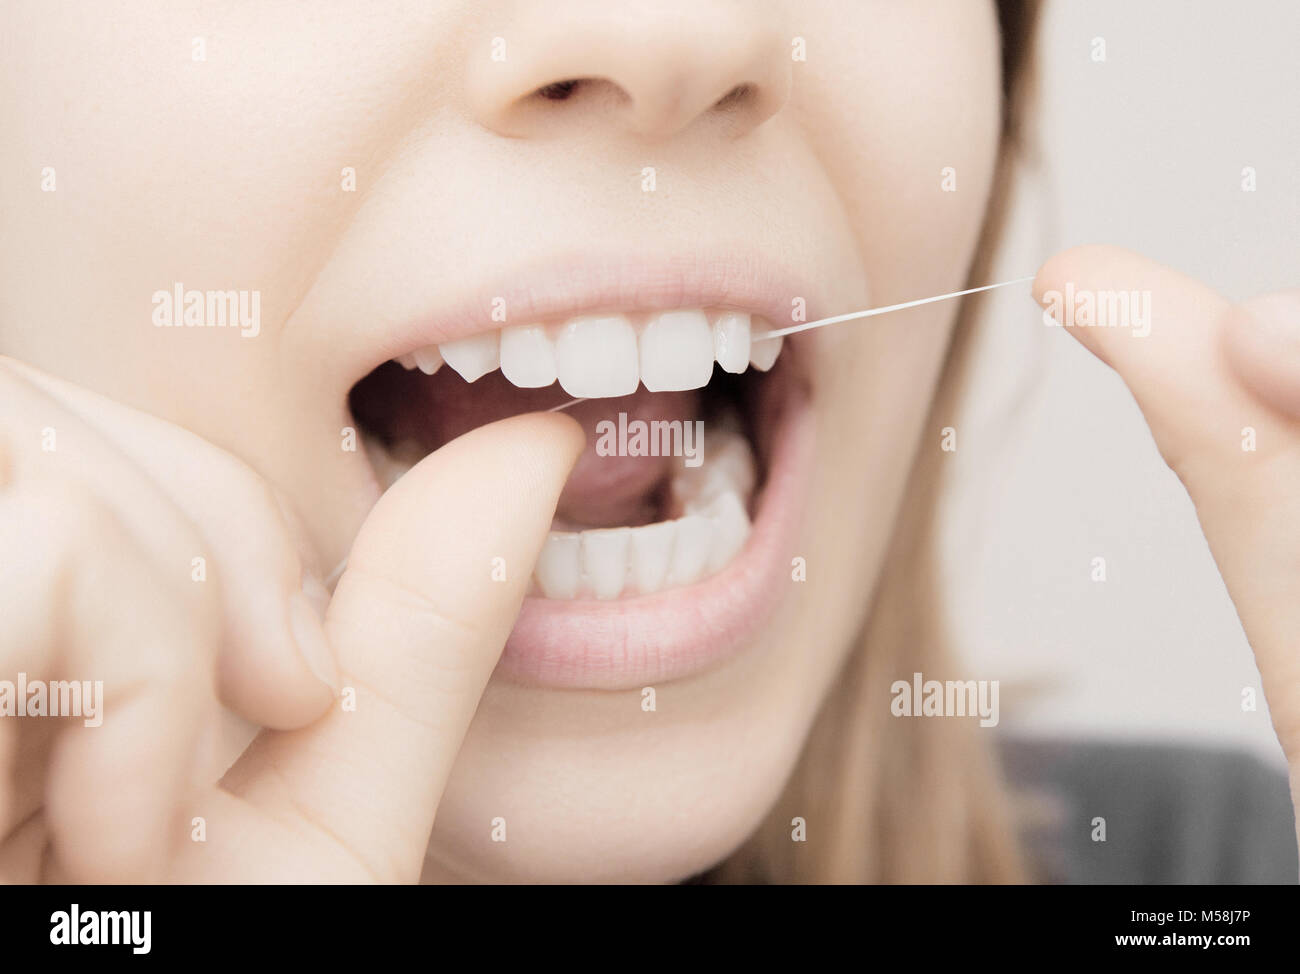 Woman uses dental floss in mouth, dental care Stock Photo